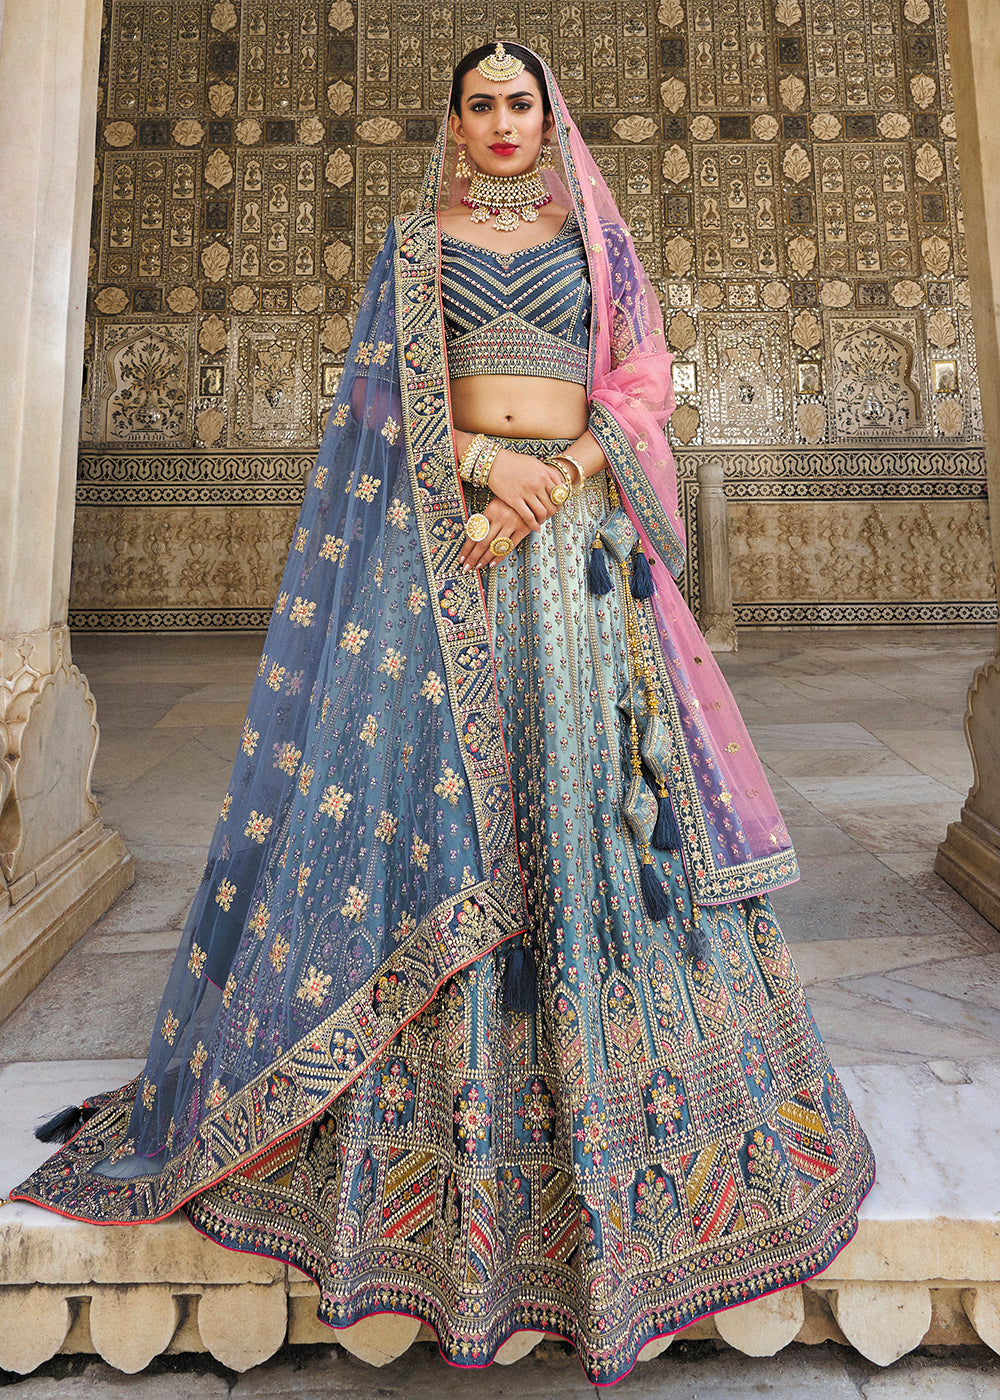 Buy Now Subline Blue Bridal Wear Heavy Embroidered Silk Lehenga Choli Online in USA, UK, Canada & Worldwide at Empress Clothing.